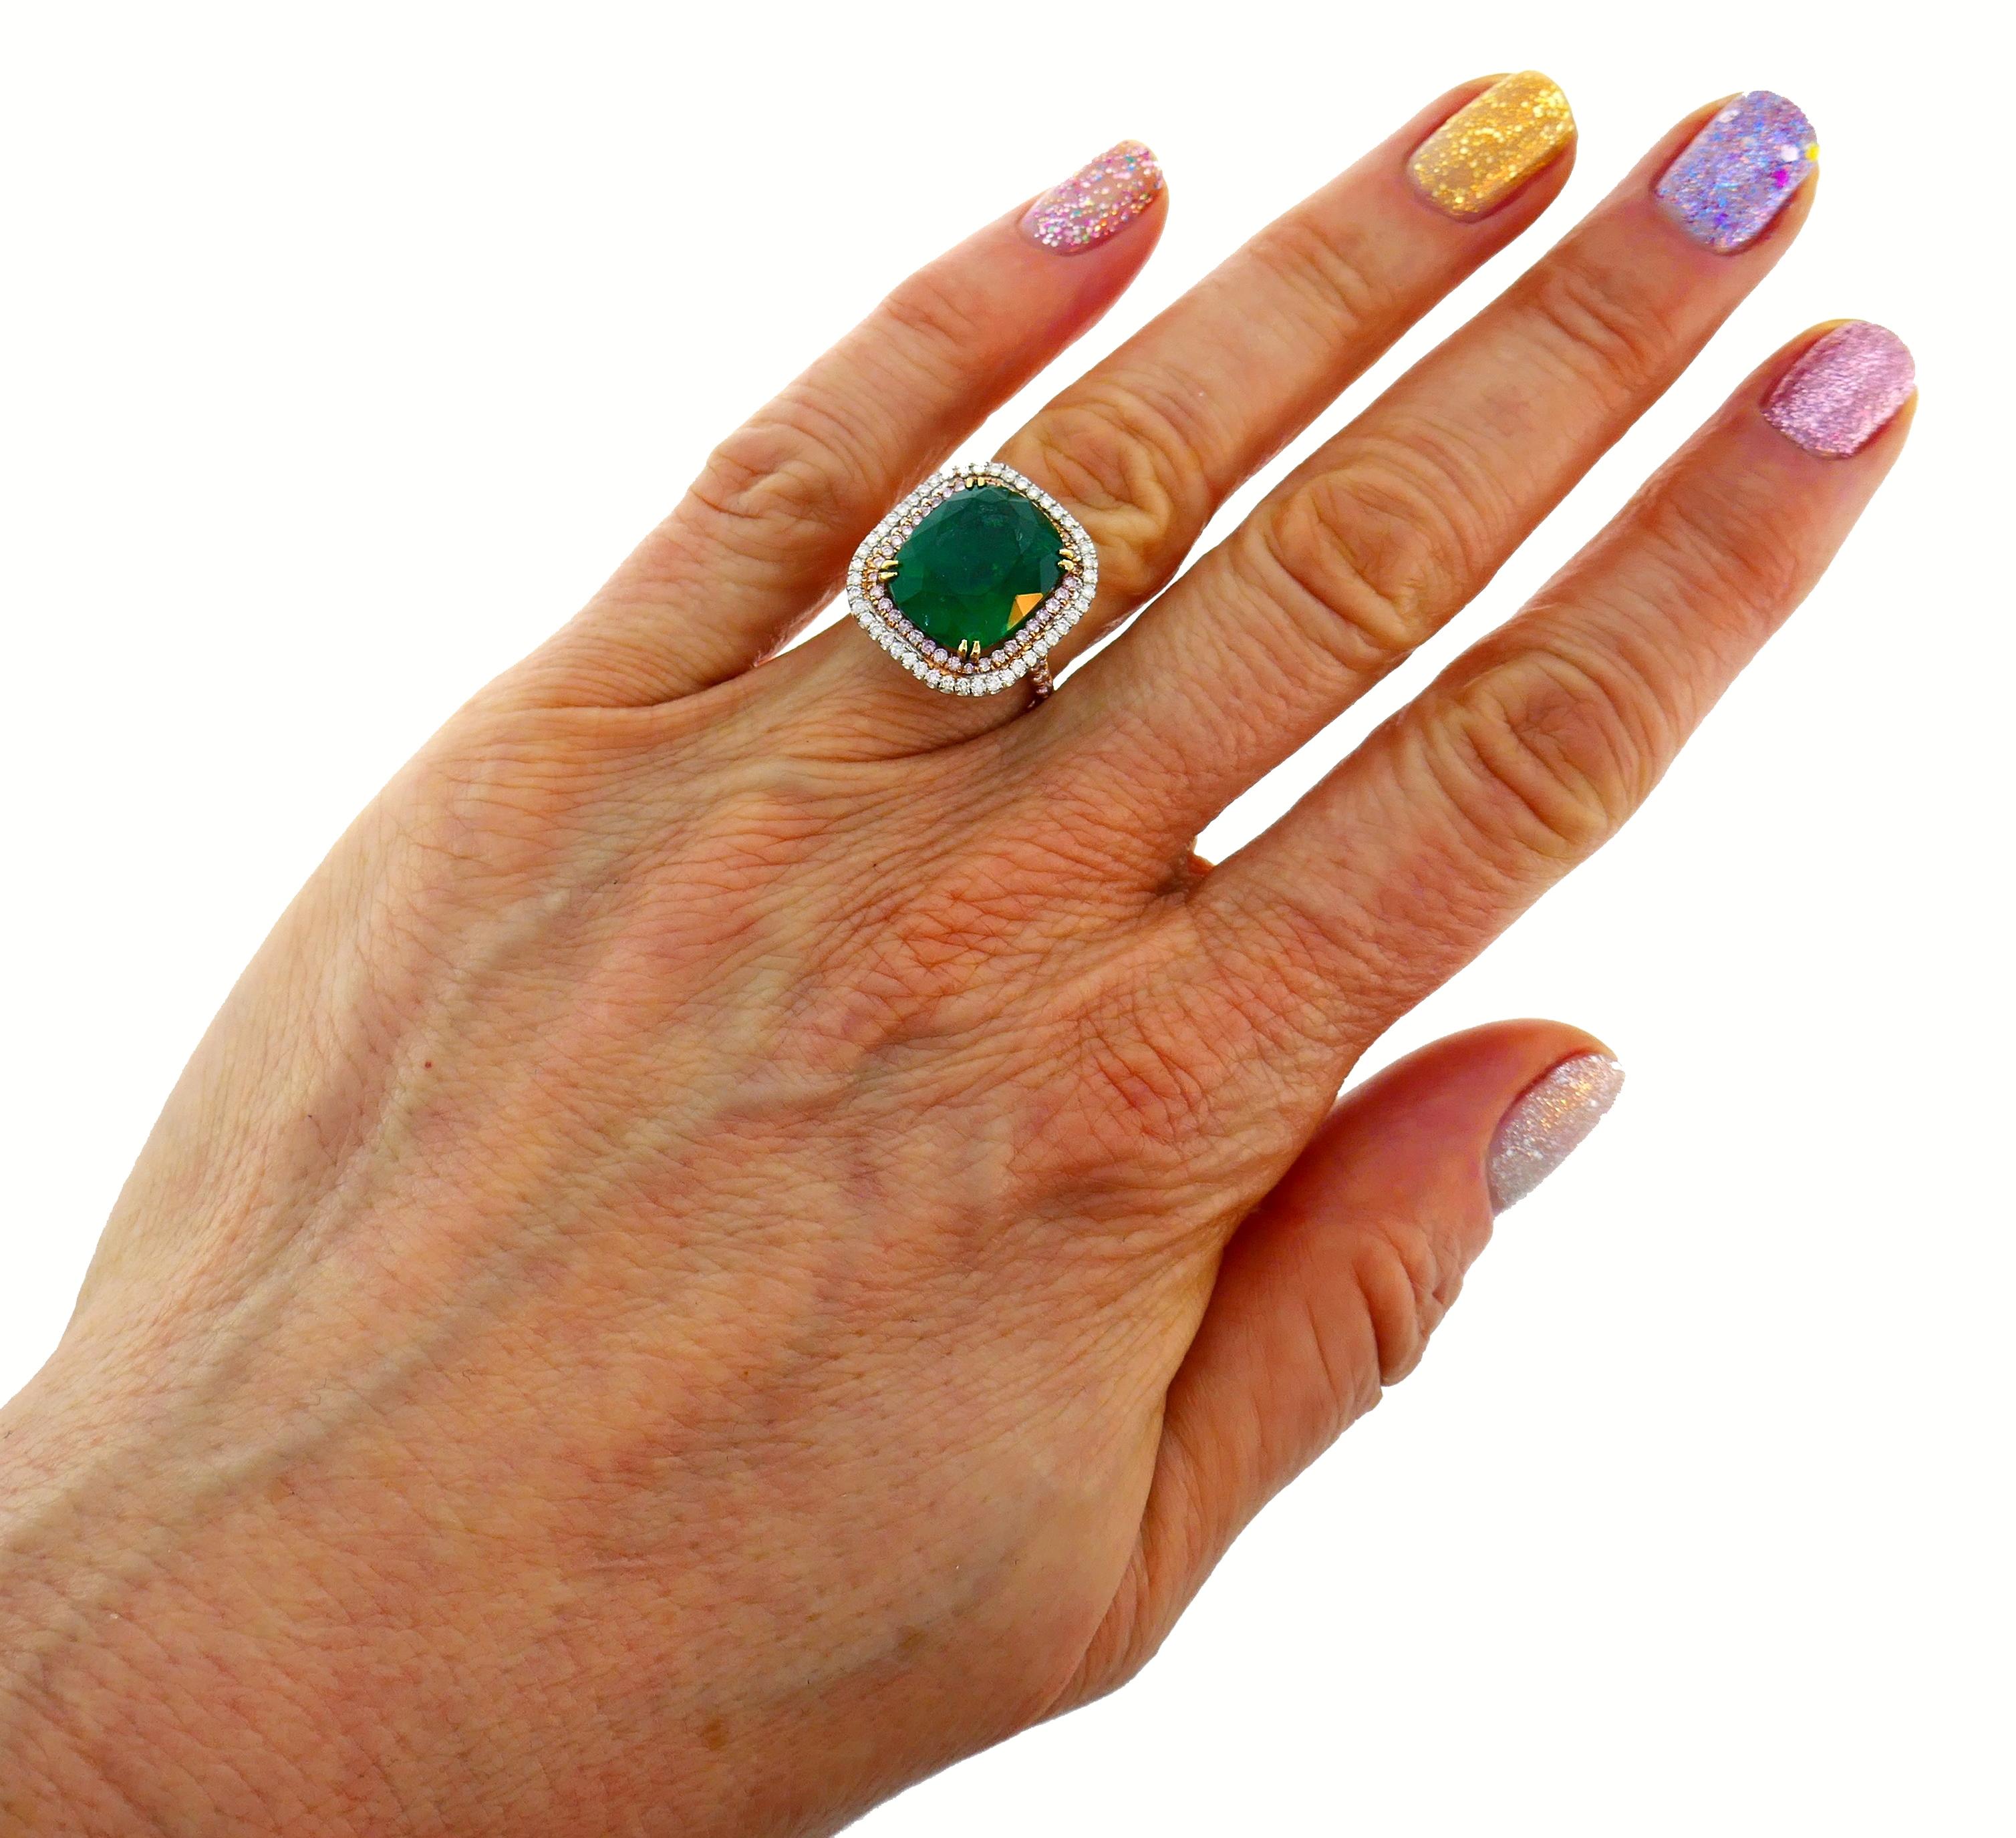 Sparkly and colorful ring. Timeless, chic and elegant, the ring is a great addition to your jewelry collection.
It is made of 18 karat (stamped) rose and white gold and features a gorgeous color 10.50-carat cushion cut emerald framed by a row of